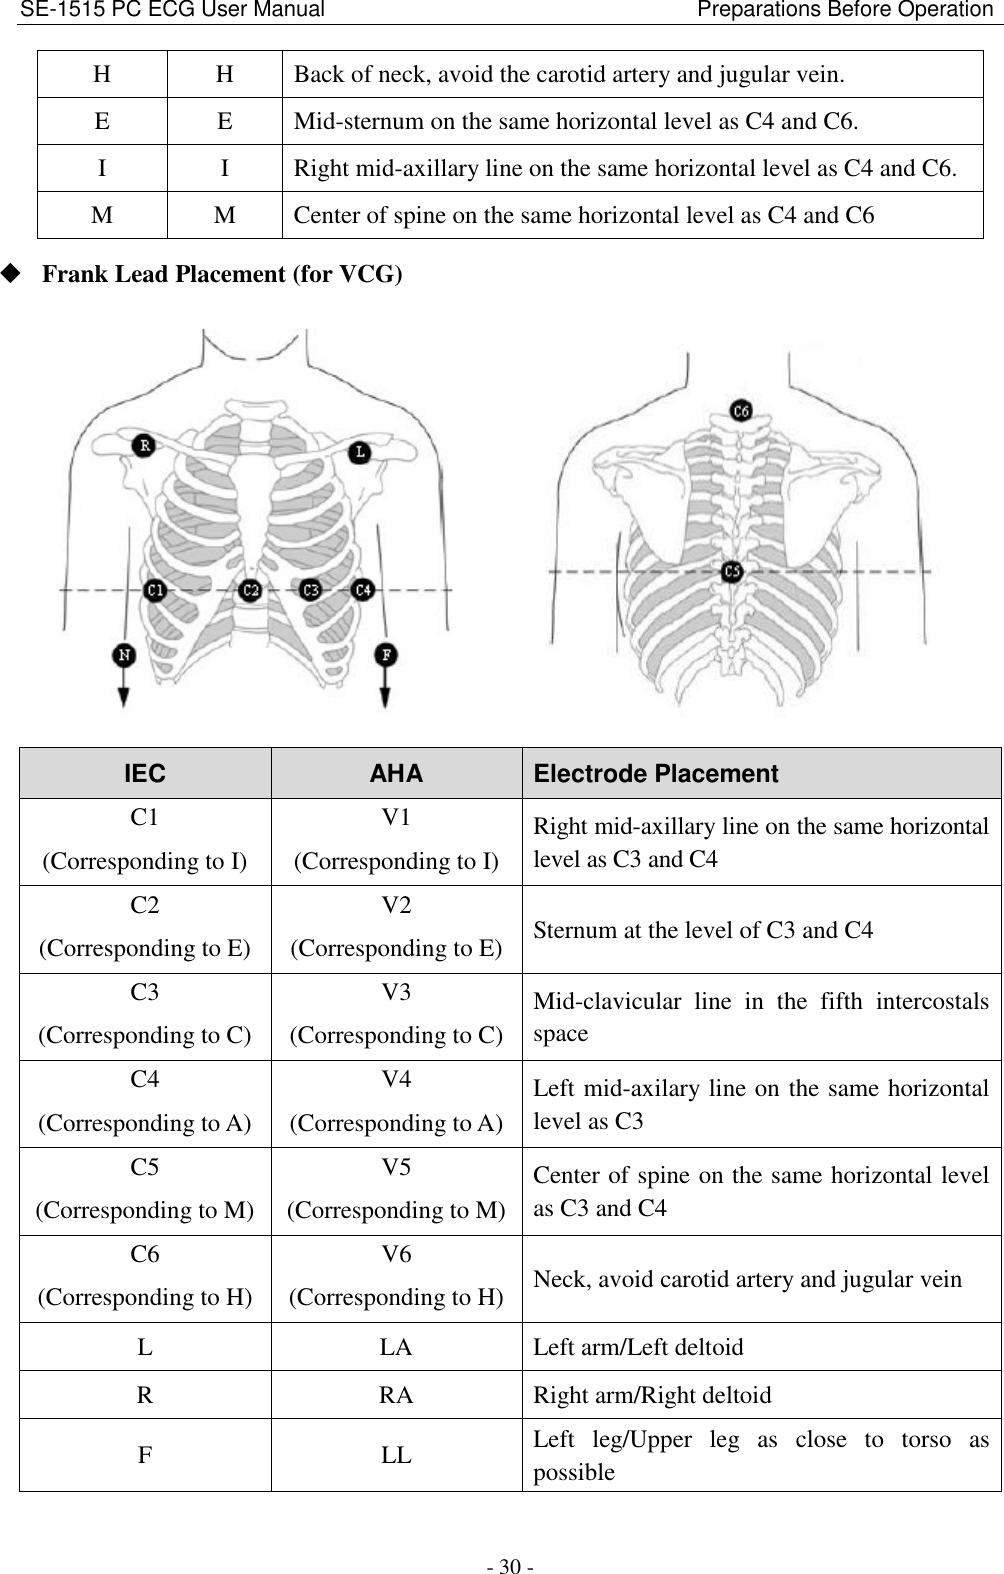 SE-1515 PC ECG User Manual                                                                    Preparations Before Operation - 30 - H H Back of neck, avoid the carotid artery and jugular vein. E E Mid-sternum on the same horizontal level as C4 and C6. I I Right mid-axillary line on the same horizontal level as C4 and C6. M M Center of spine on the same horizontal level as C4 and C6  Frank Lead Placement (for VCG)        IEC AHA Electrode Placement C1 (Corresponding to I) V1 (Corresponding to I) Right mid-axillary line on the same horizontal level as C3 and C4 C2 (Corresponding to E) V2 (Corresponding to E) Sternum at the level of C3 and C4 C3 (Corresponding to C) V3 (Corresponding to C) Mid-clavicular  line  in  the  fifth  intercostals space C4 (Corresponding to A) V4 (Corresponding to A) Left mid-axilary line on the same horizontal level as C3 C5 (Corresponding to M) V5 (Corresponding to M) Center of spine on the same horizontal level as C3 and C4 C6 (Corresponding to H) V6 (Corresponding to H) Neck, avoid carotid artery and jugular vein L LA Left arm/Left deltoid   R RA Right arm/Right deltoid F LL Left  leg/Upper  leg  as  close  to  torso  as possible   